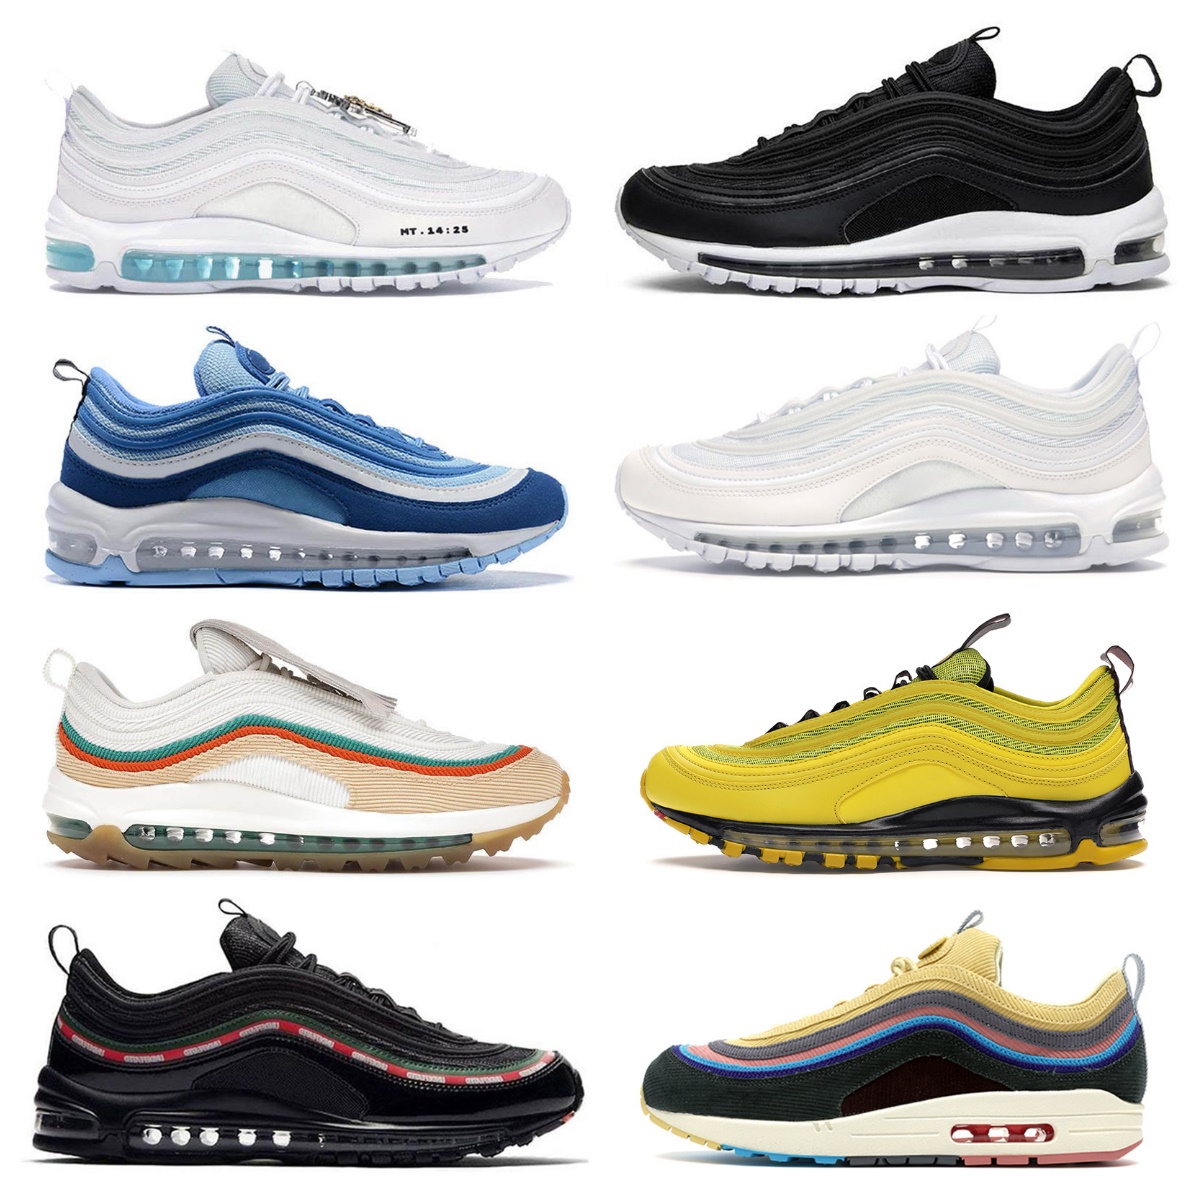 

Undefeated 97 Casual Shoes OG 97s Mens Women Sean Wotherspoon mschf x inri jesus triple black white Hot sliver bullet metalic gold max97 Bred Bright Citron Sneakers, Bubble package bag